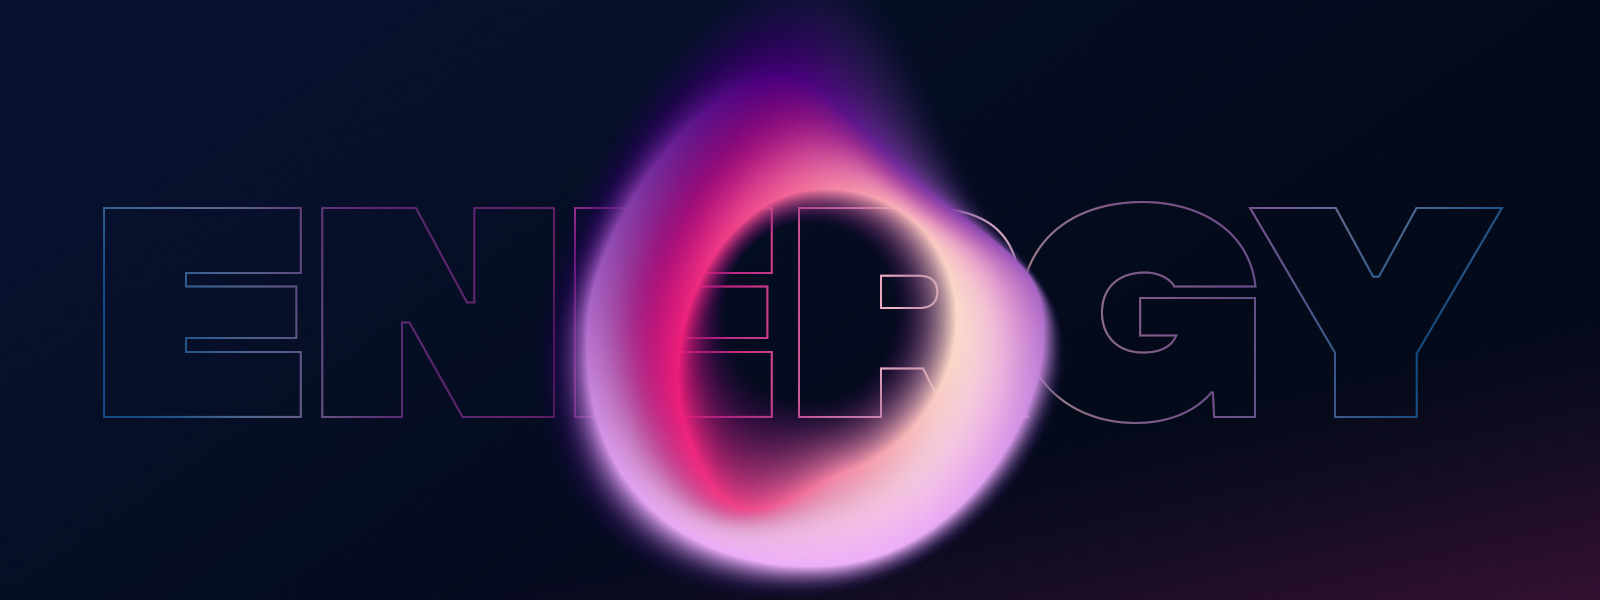 Illustration of the word ENERGY in pink/purple colors, in a dark background with a flame hollow icon in the middle